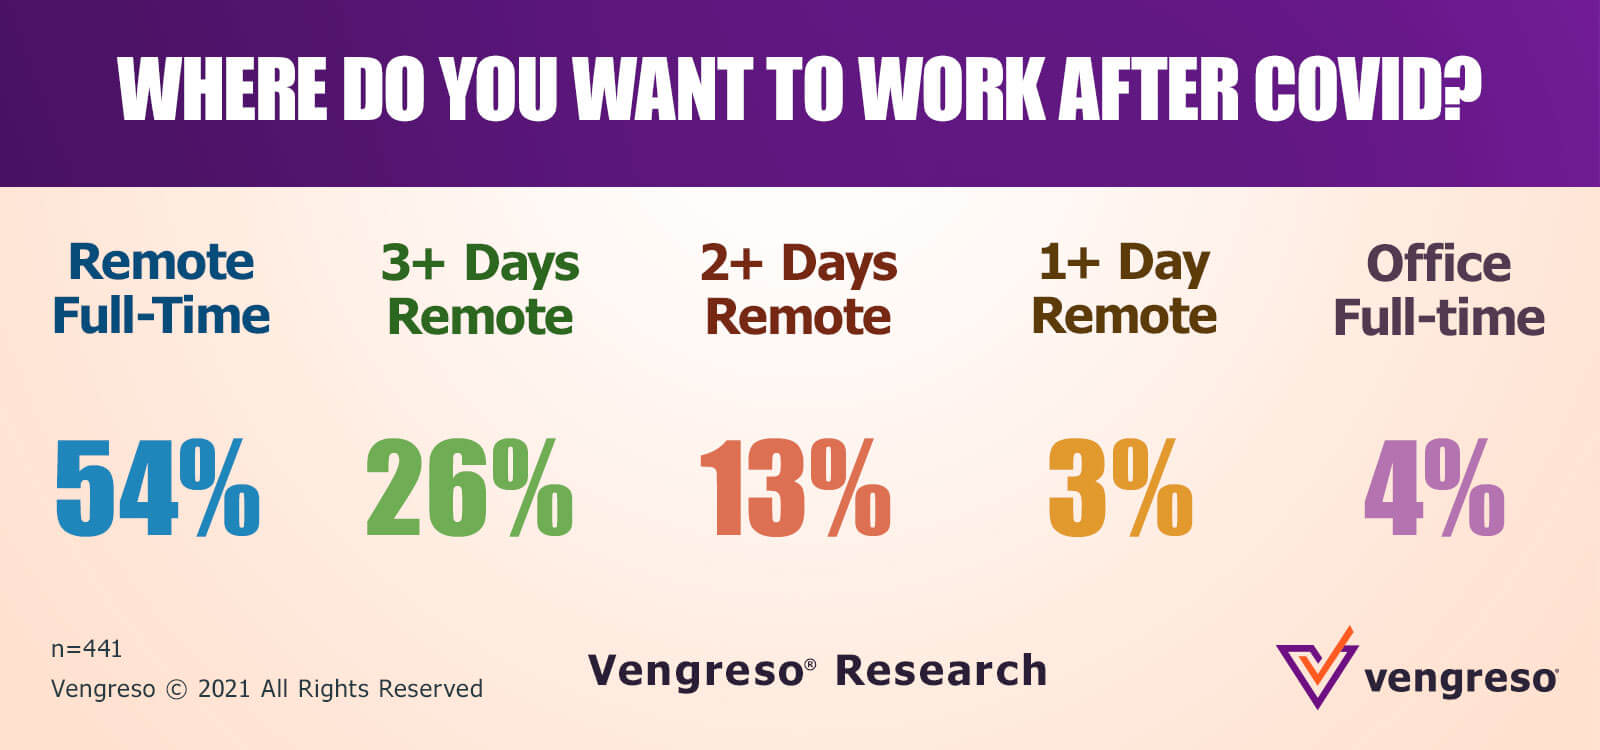 Survey Results of Where You Want to Work After COVID